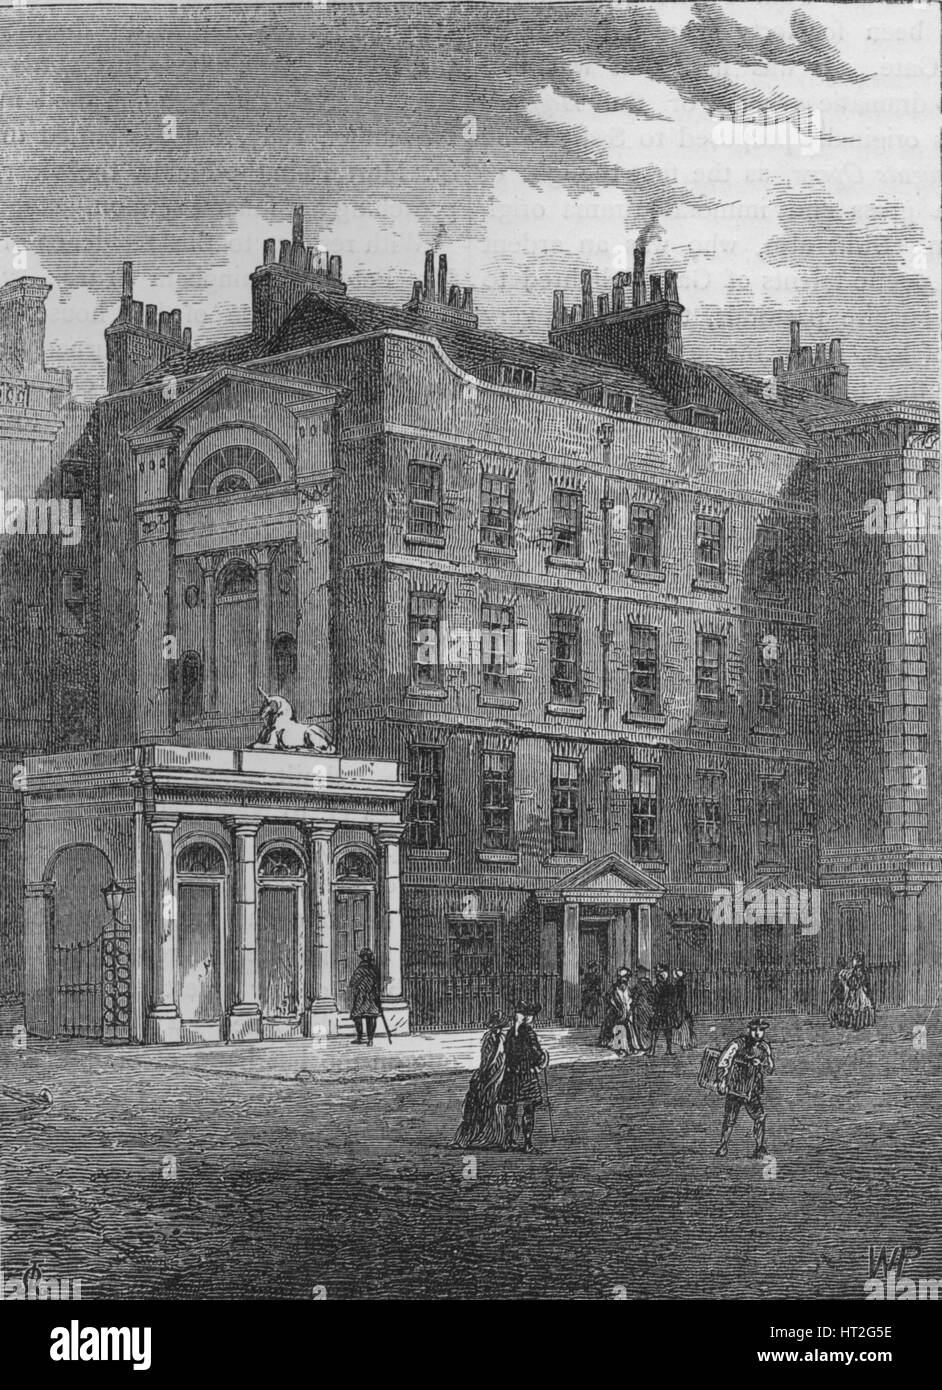 Messrs Christie and Manson's original auction rooms, Westminster, London, c1860 (1878). Artist: Unknown. Stock Photo